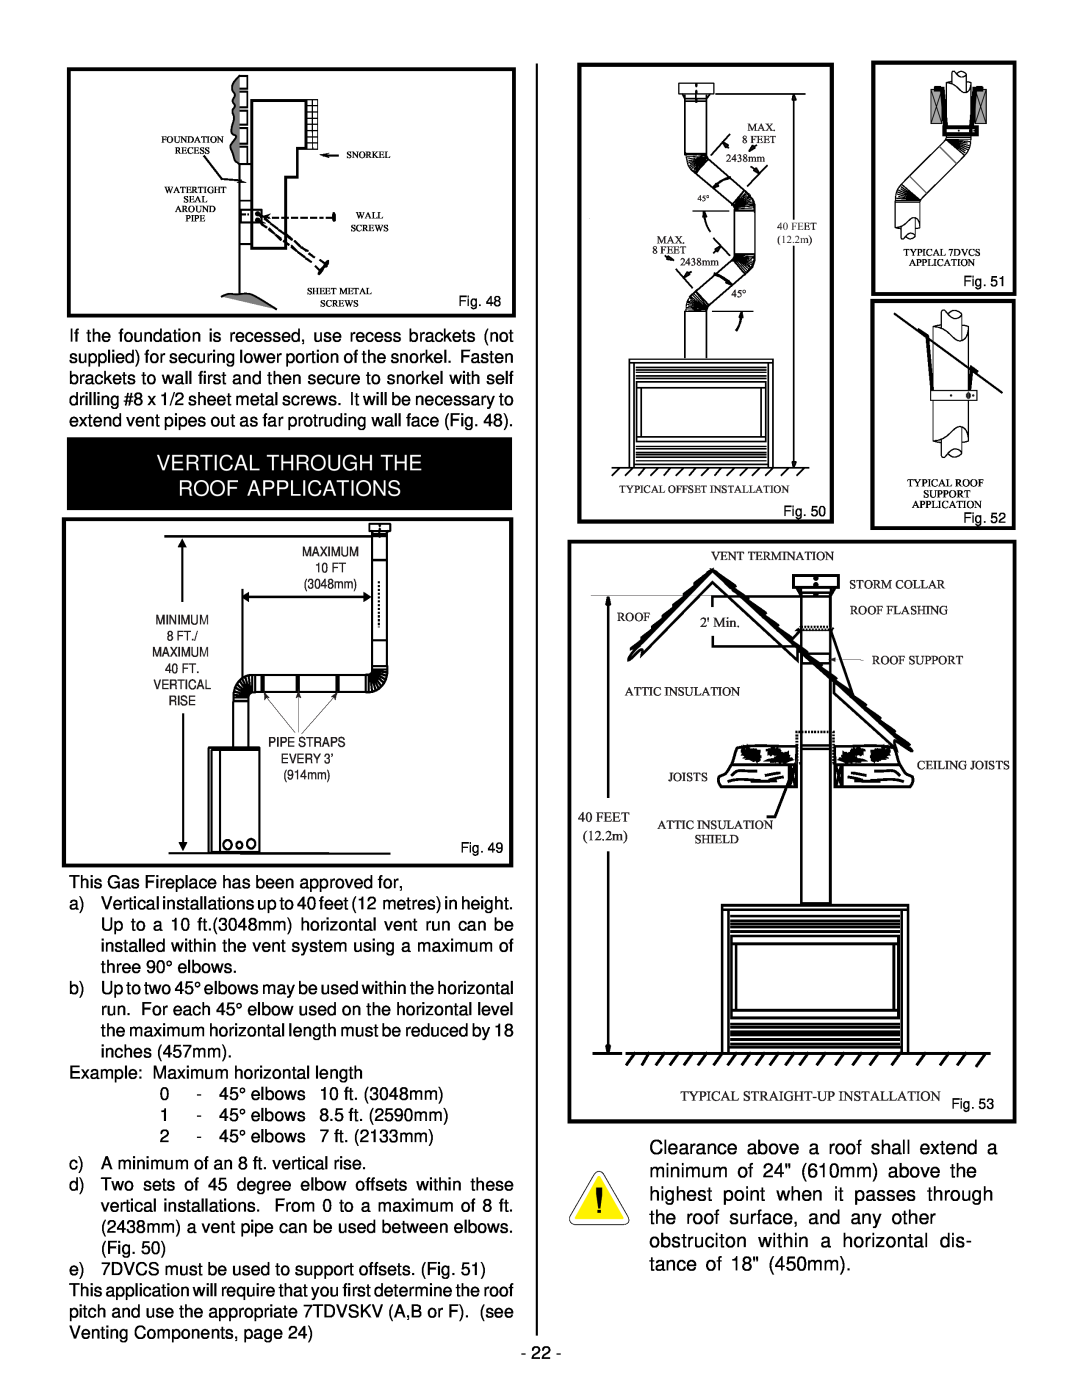 Vermont Casting BHDT36 installation instructions Vertical Through The Roof Applications 